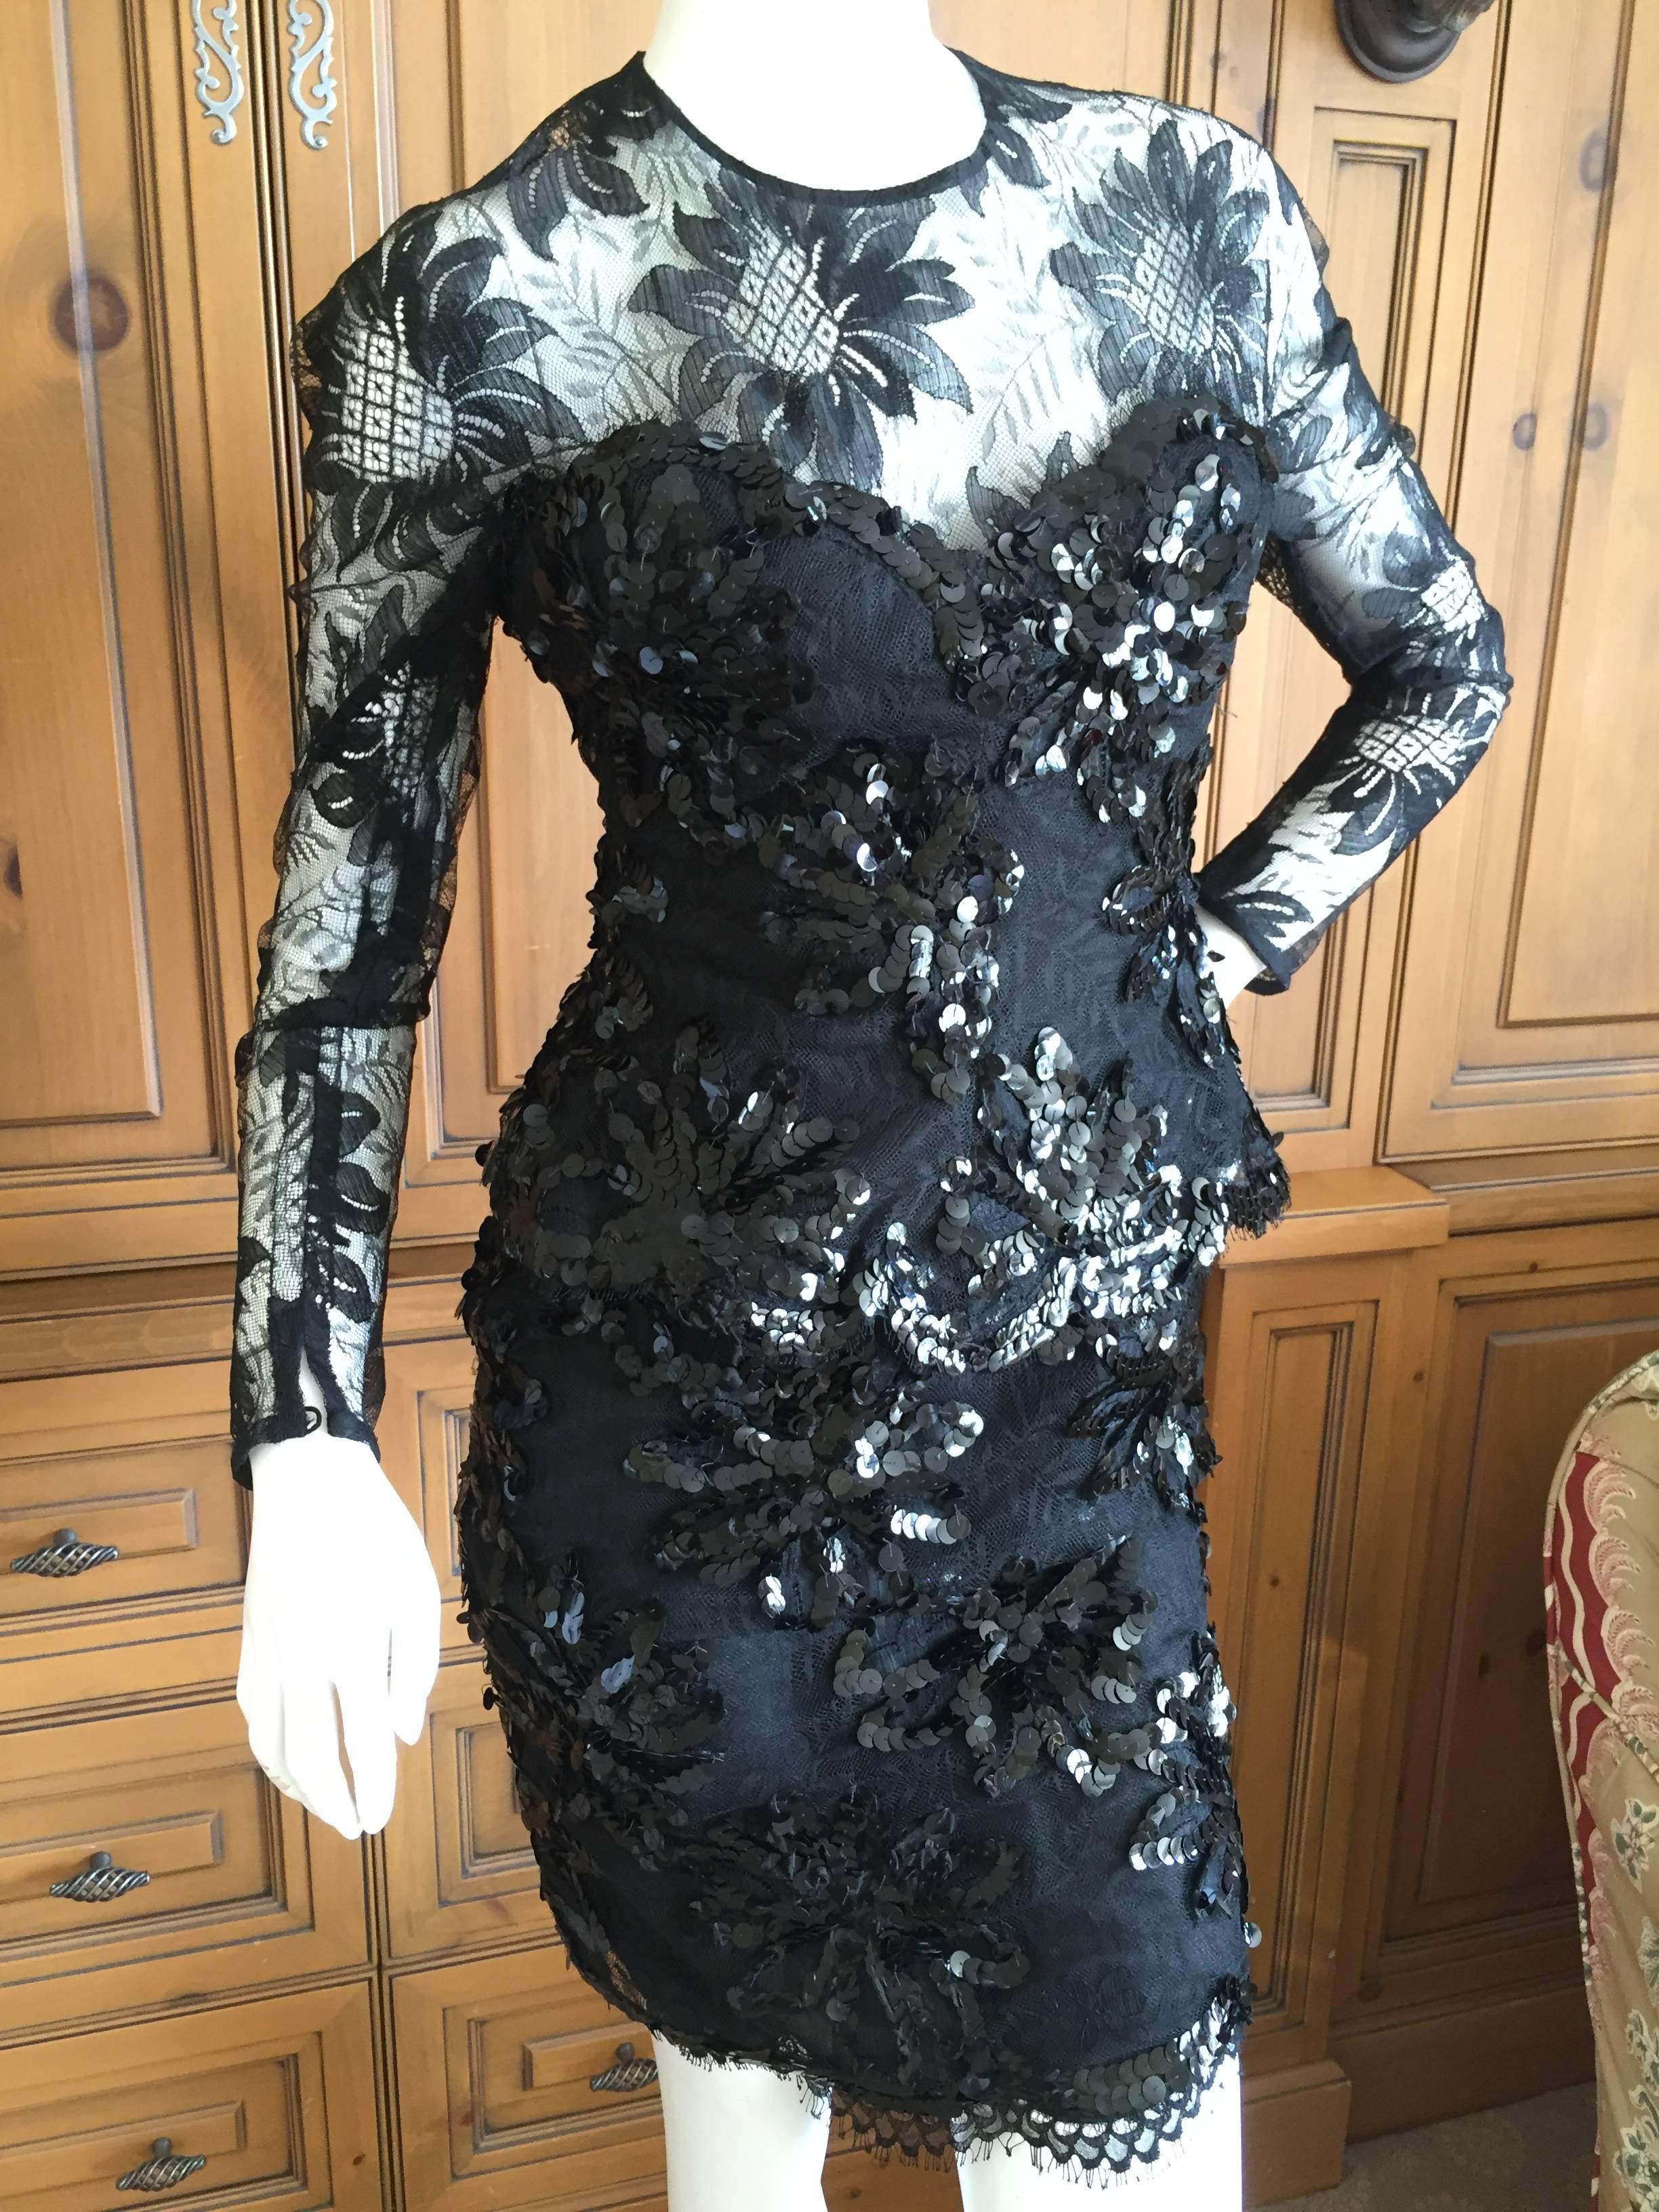 Exquisite little black cocktail dress by Gianfranco Ferre for Christian Dior.
The interior has a very intricate taffeta boned corset that is a work of art in itself.
There is a slight peplum with scalloped lace edges.
I would estimate it a size